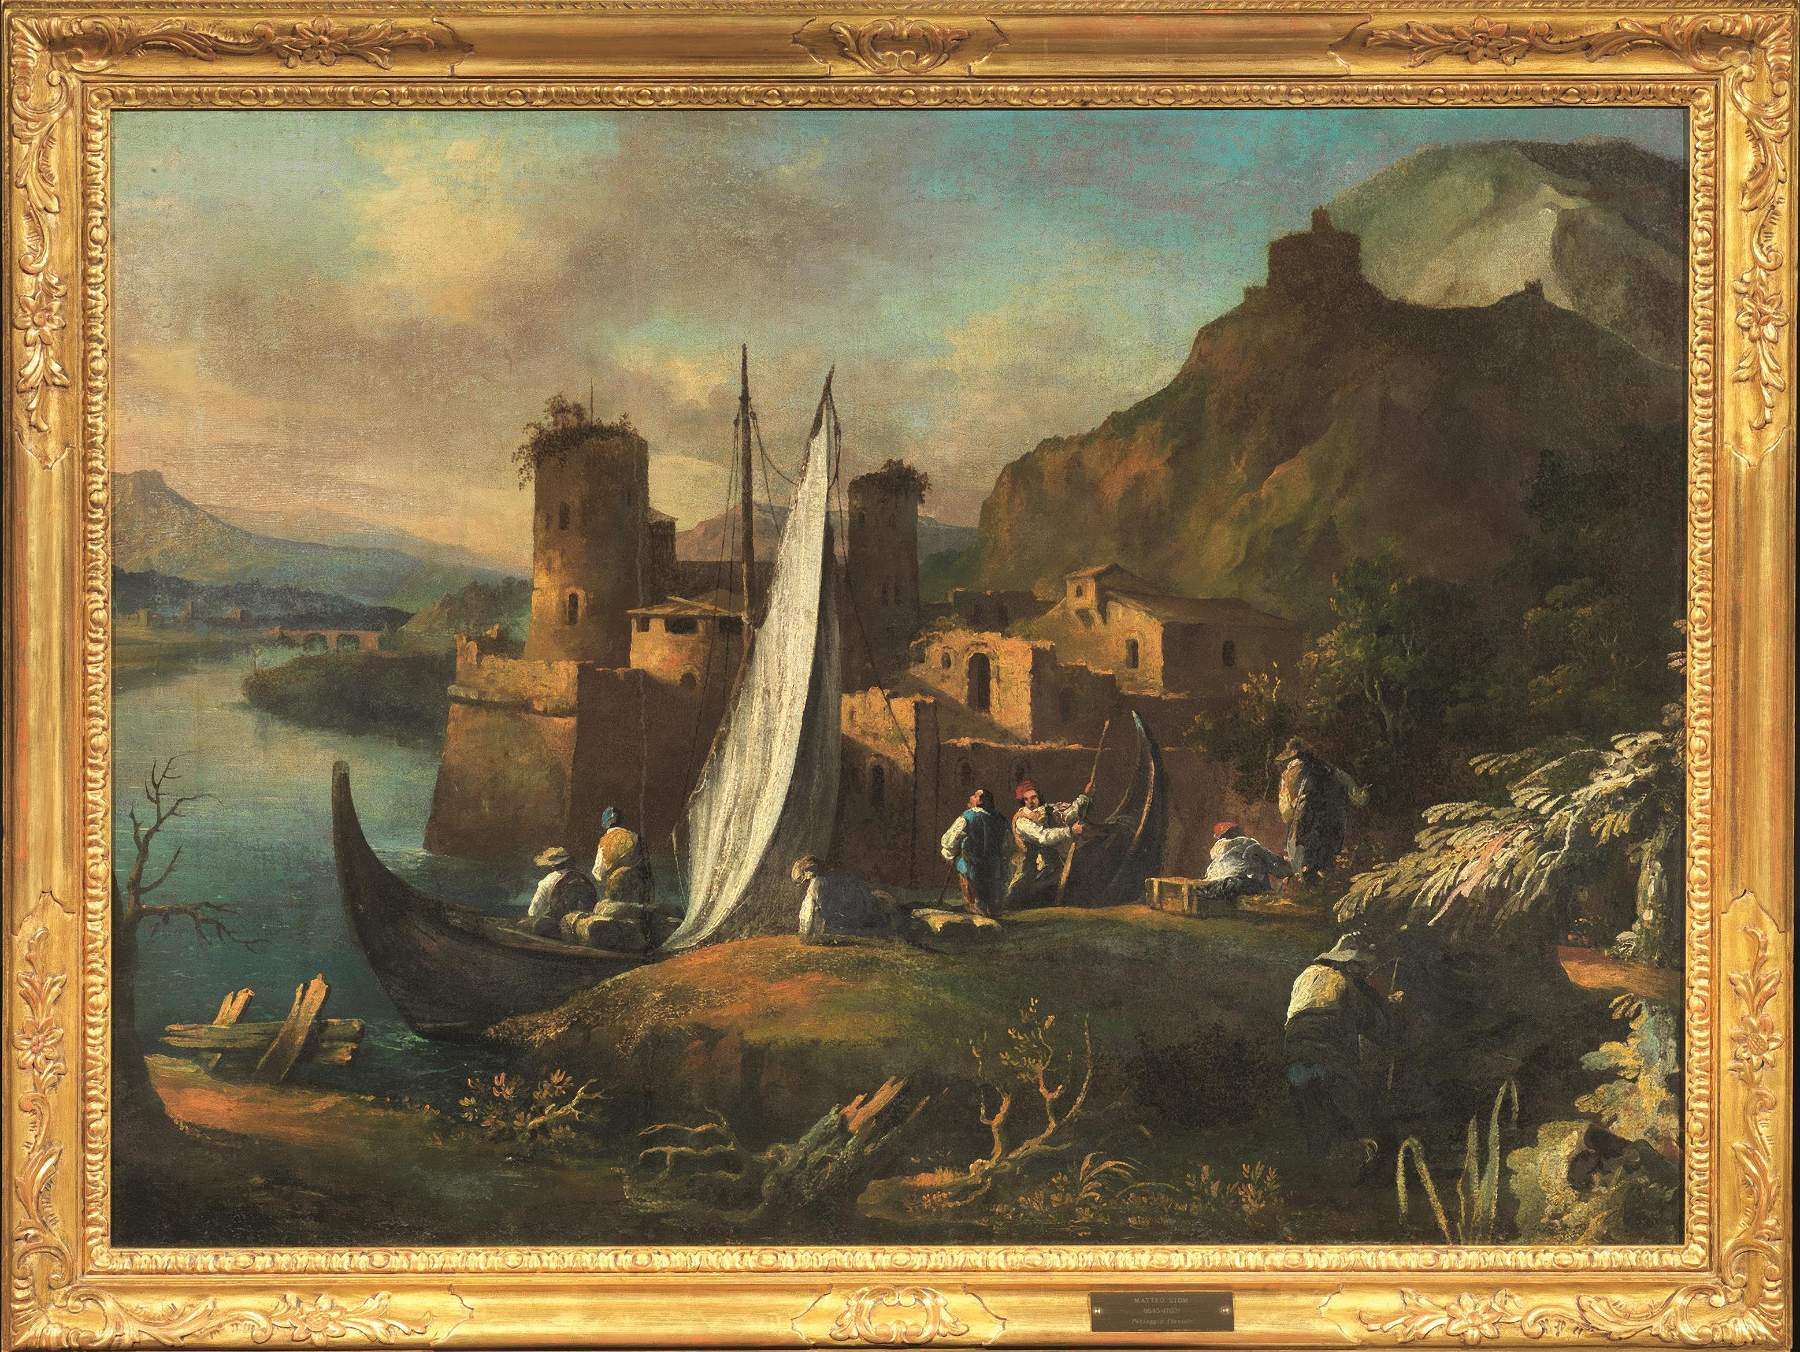 Auctions April 7 to 13: 18th century paintings, antiques and jewelry